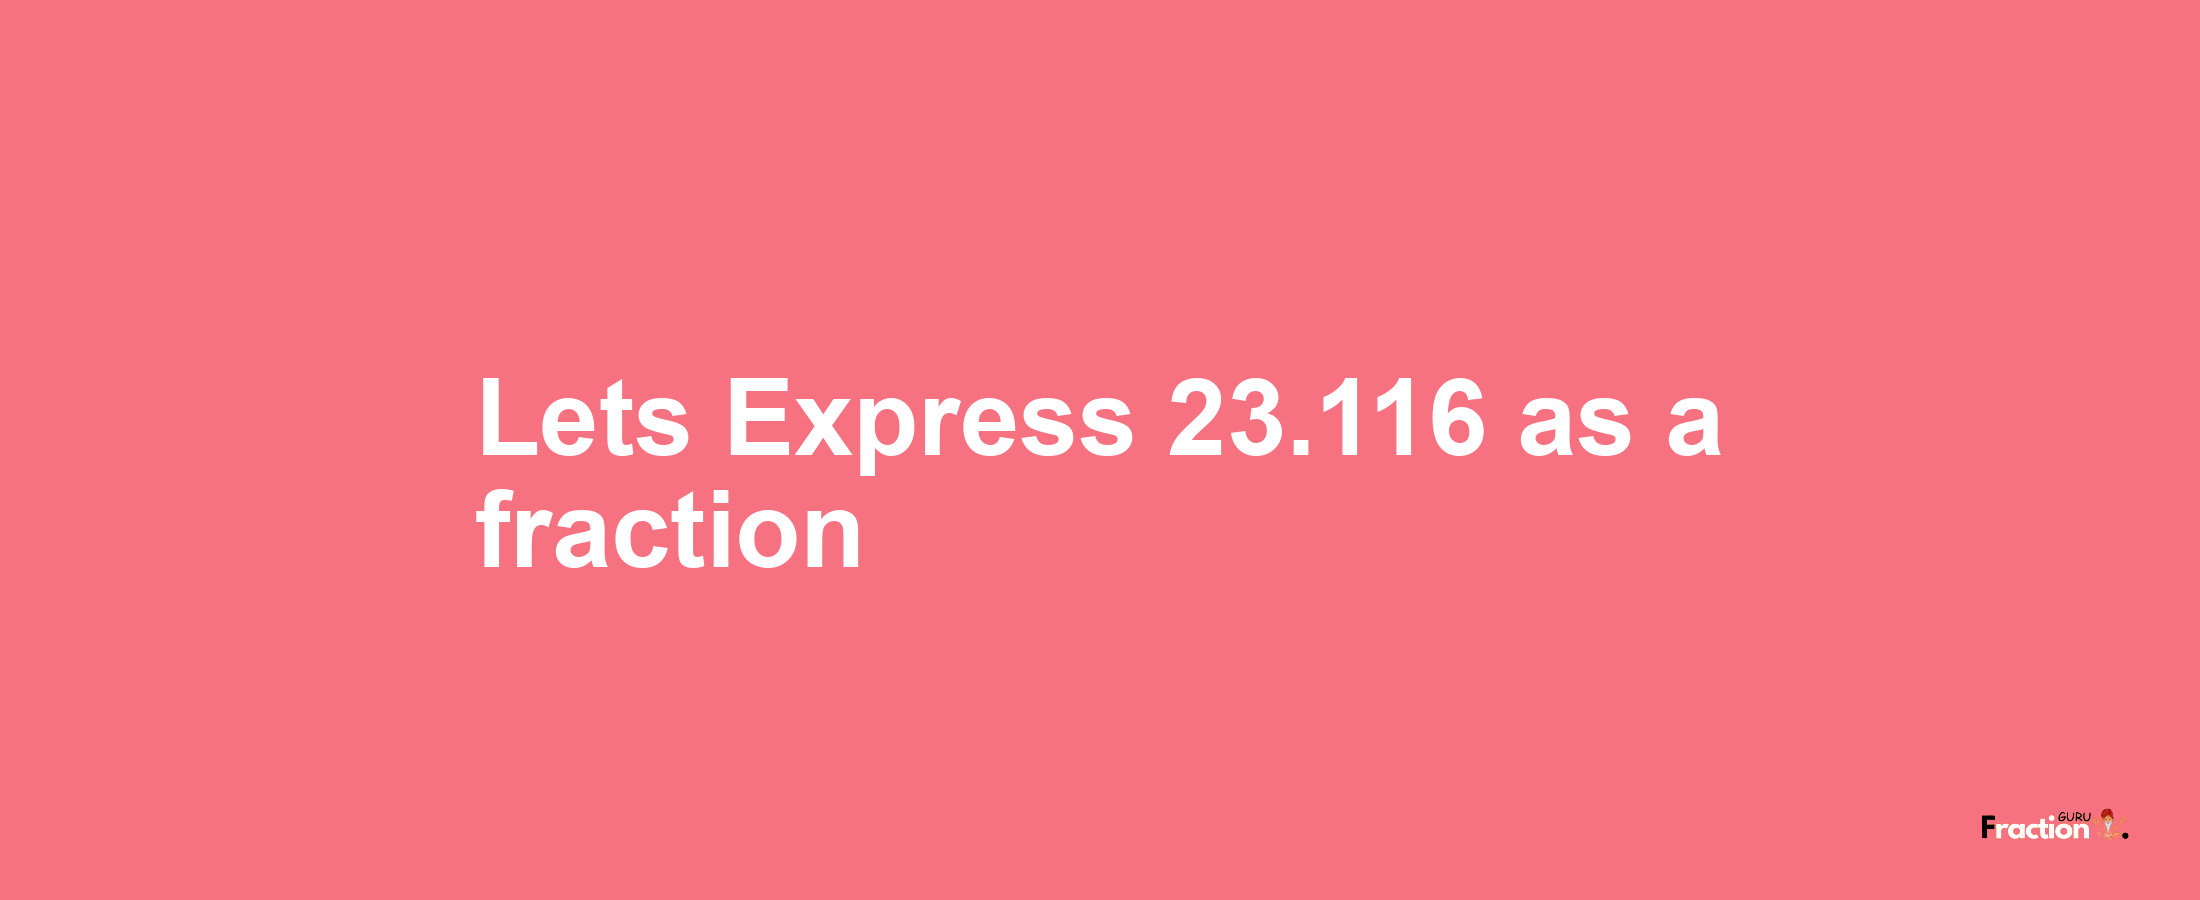 Lets Express 23.116 as afraction